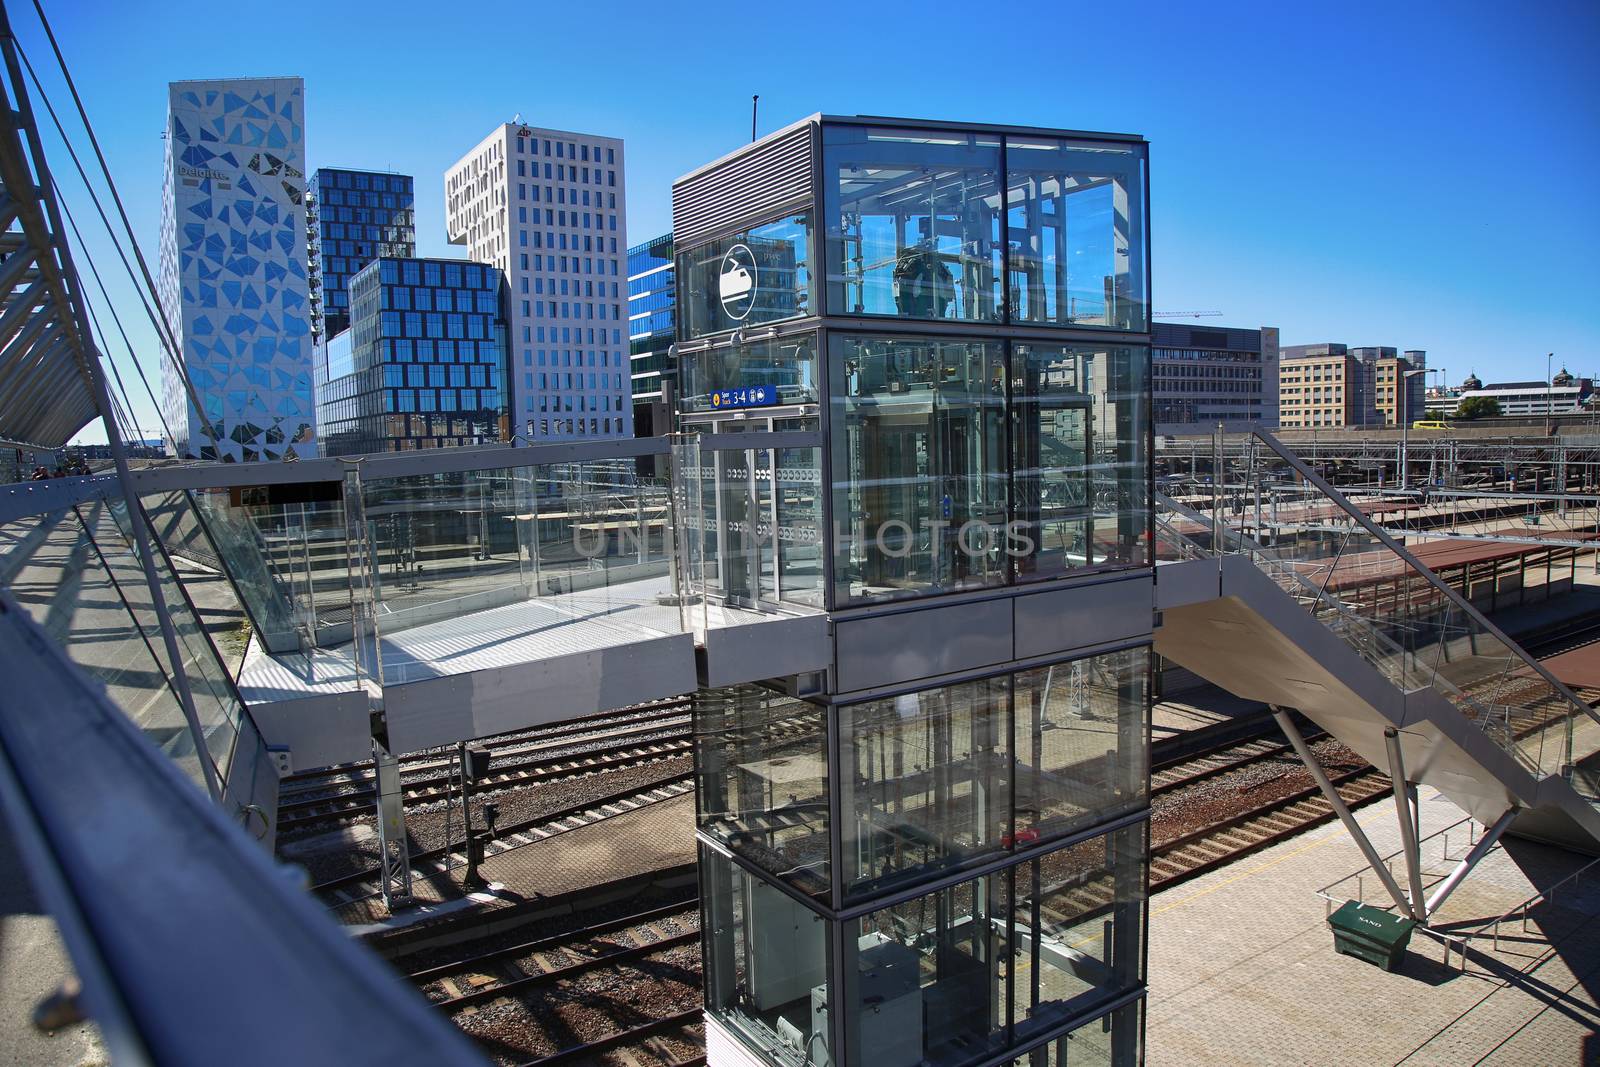 OSLO, NORWAY – AUGUST 17, 2016: View of Akrobaten pedestrian bridge  with modern business architecture and elevator lift that leads to the railway station street in Oslo, Norway on August 17, 2016.